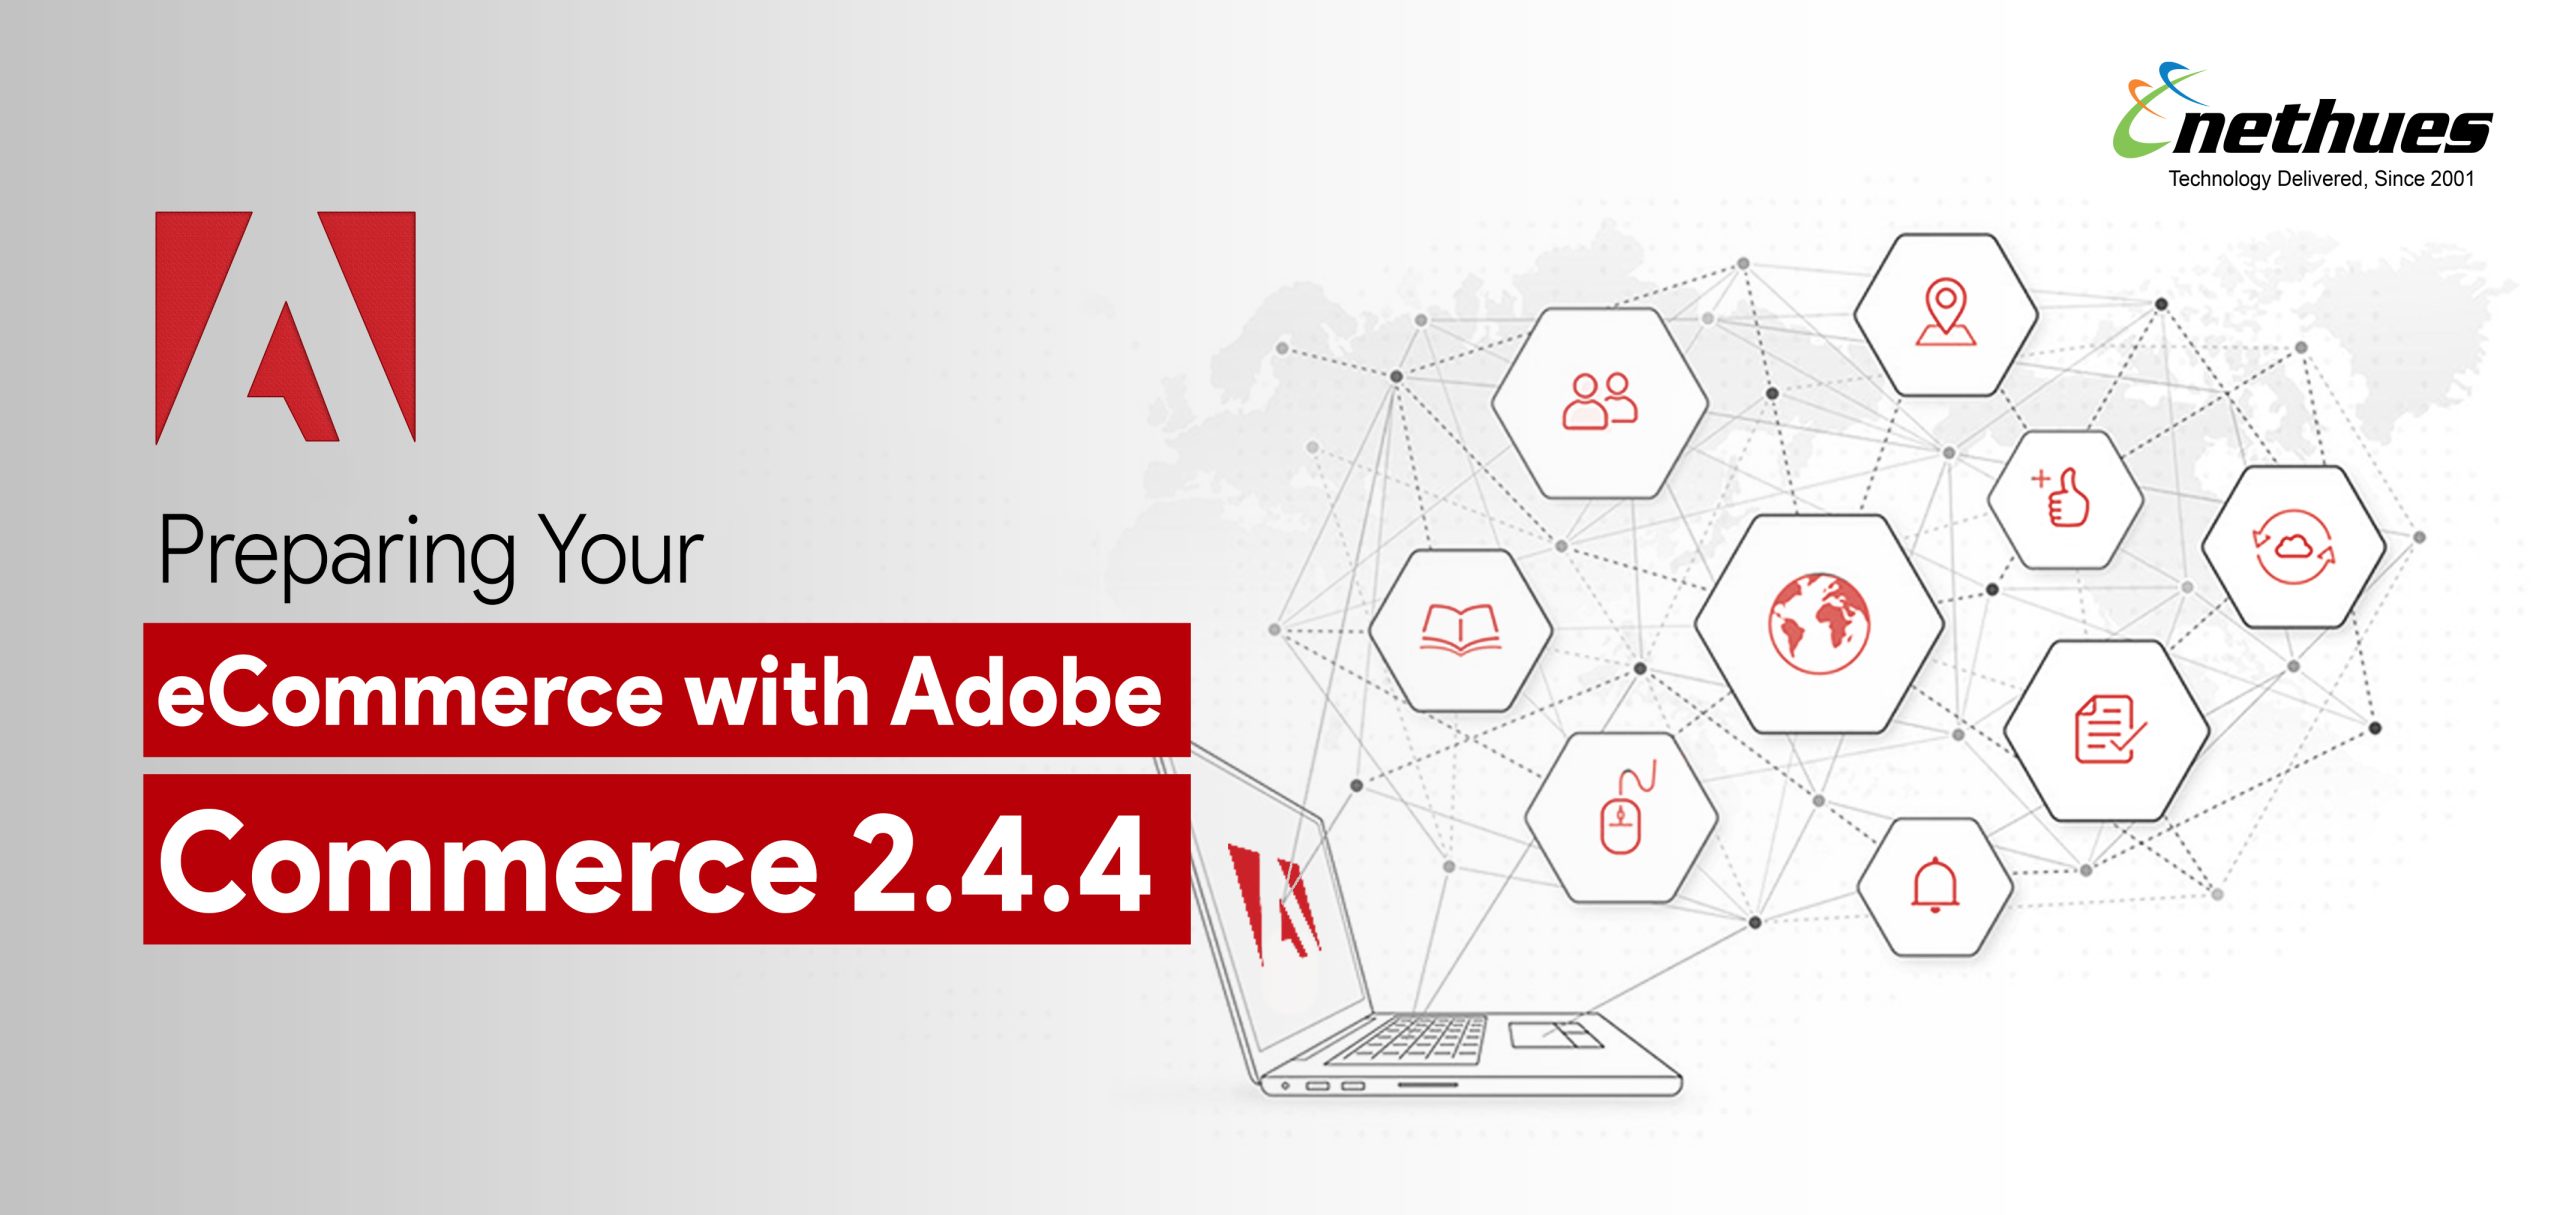 Get Ahead of the Curve: Preparing Your eCommerce with Adobe Commerce 2.4.4